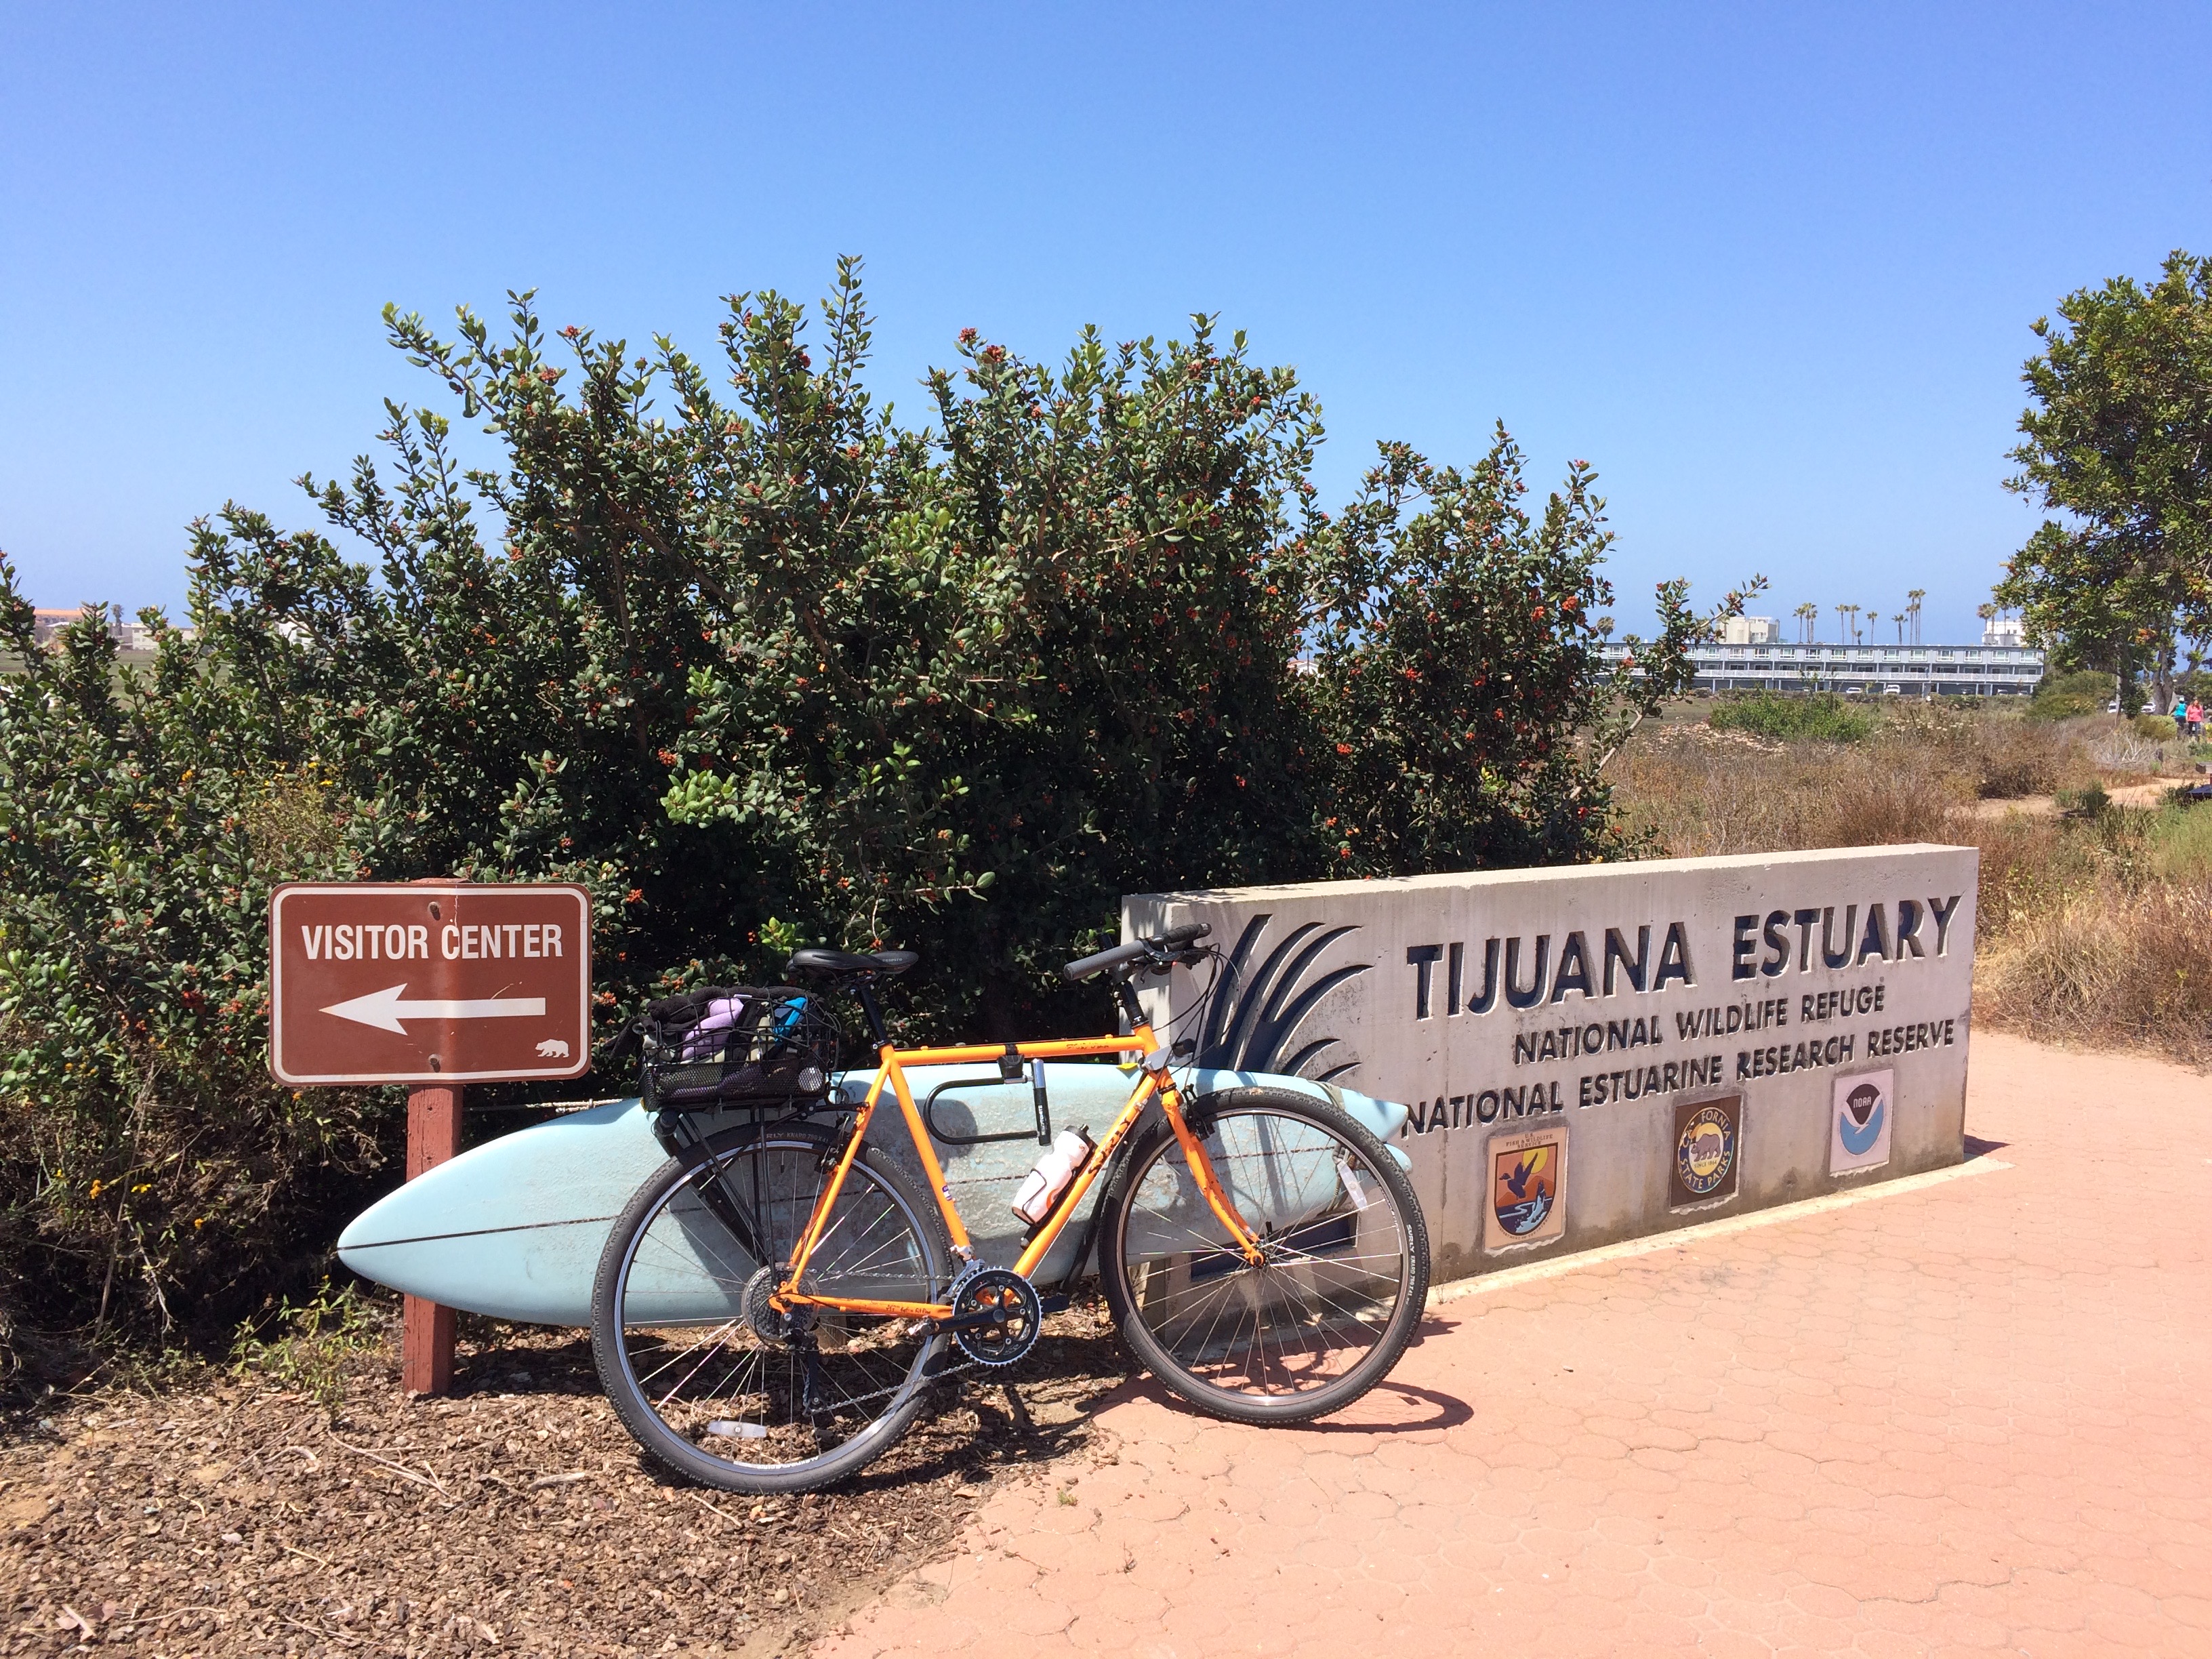 Along a marsh, a visitor center sign points left as a surfboard, a bike, and a Tijuana Estuary sign are seen.